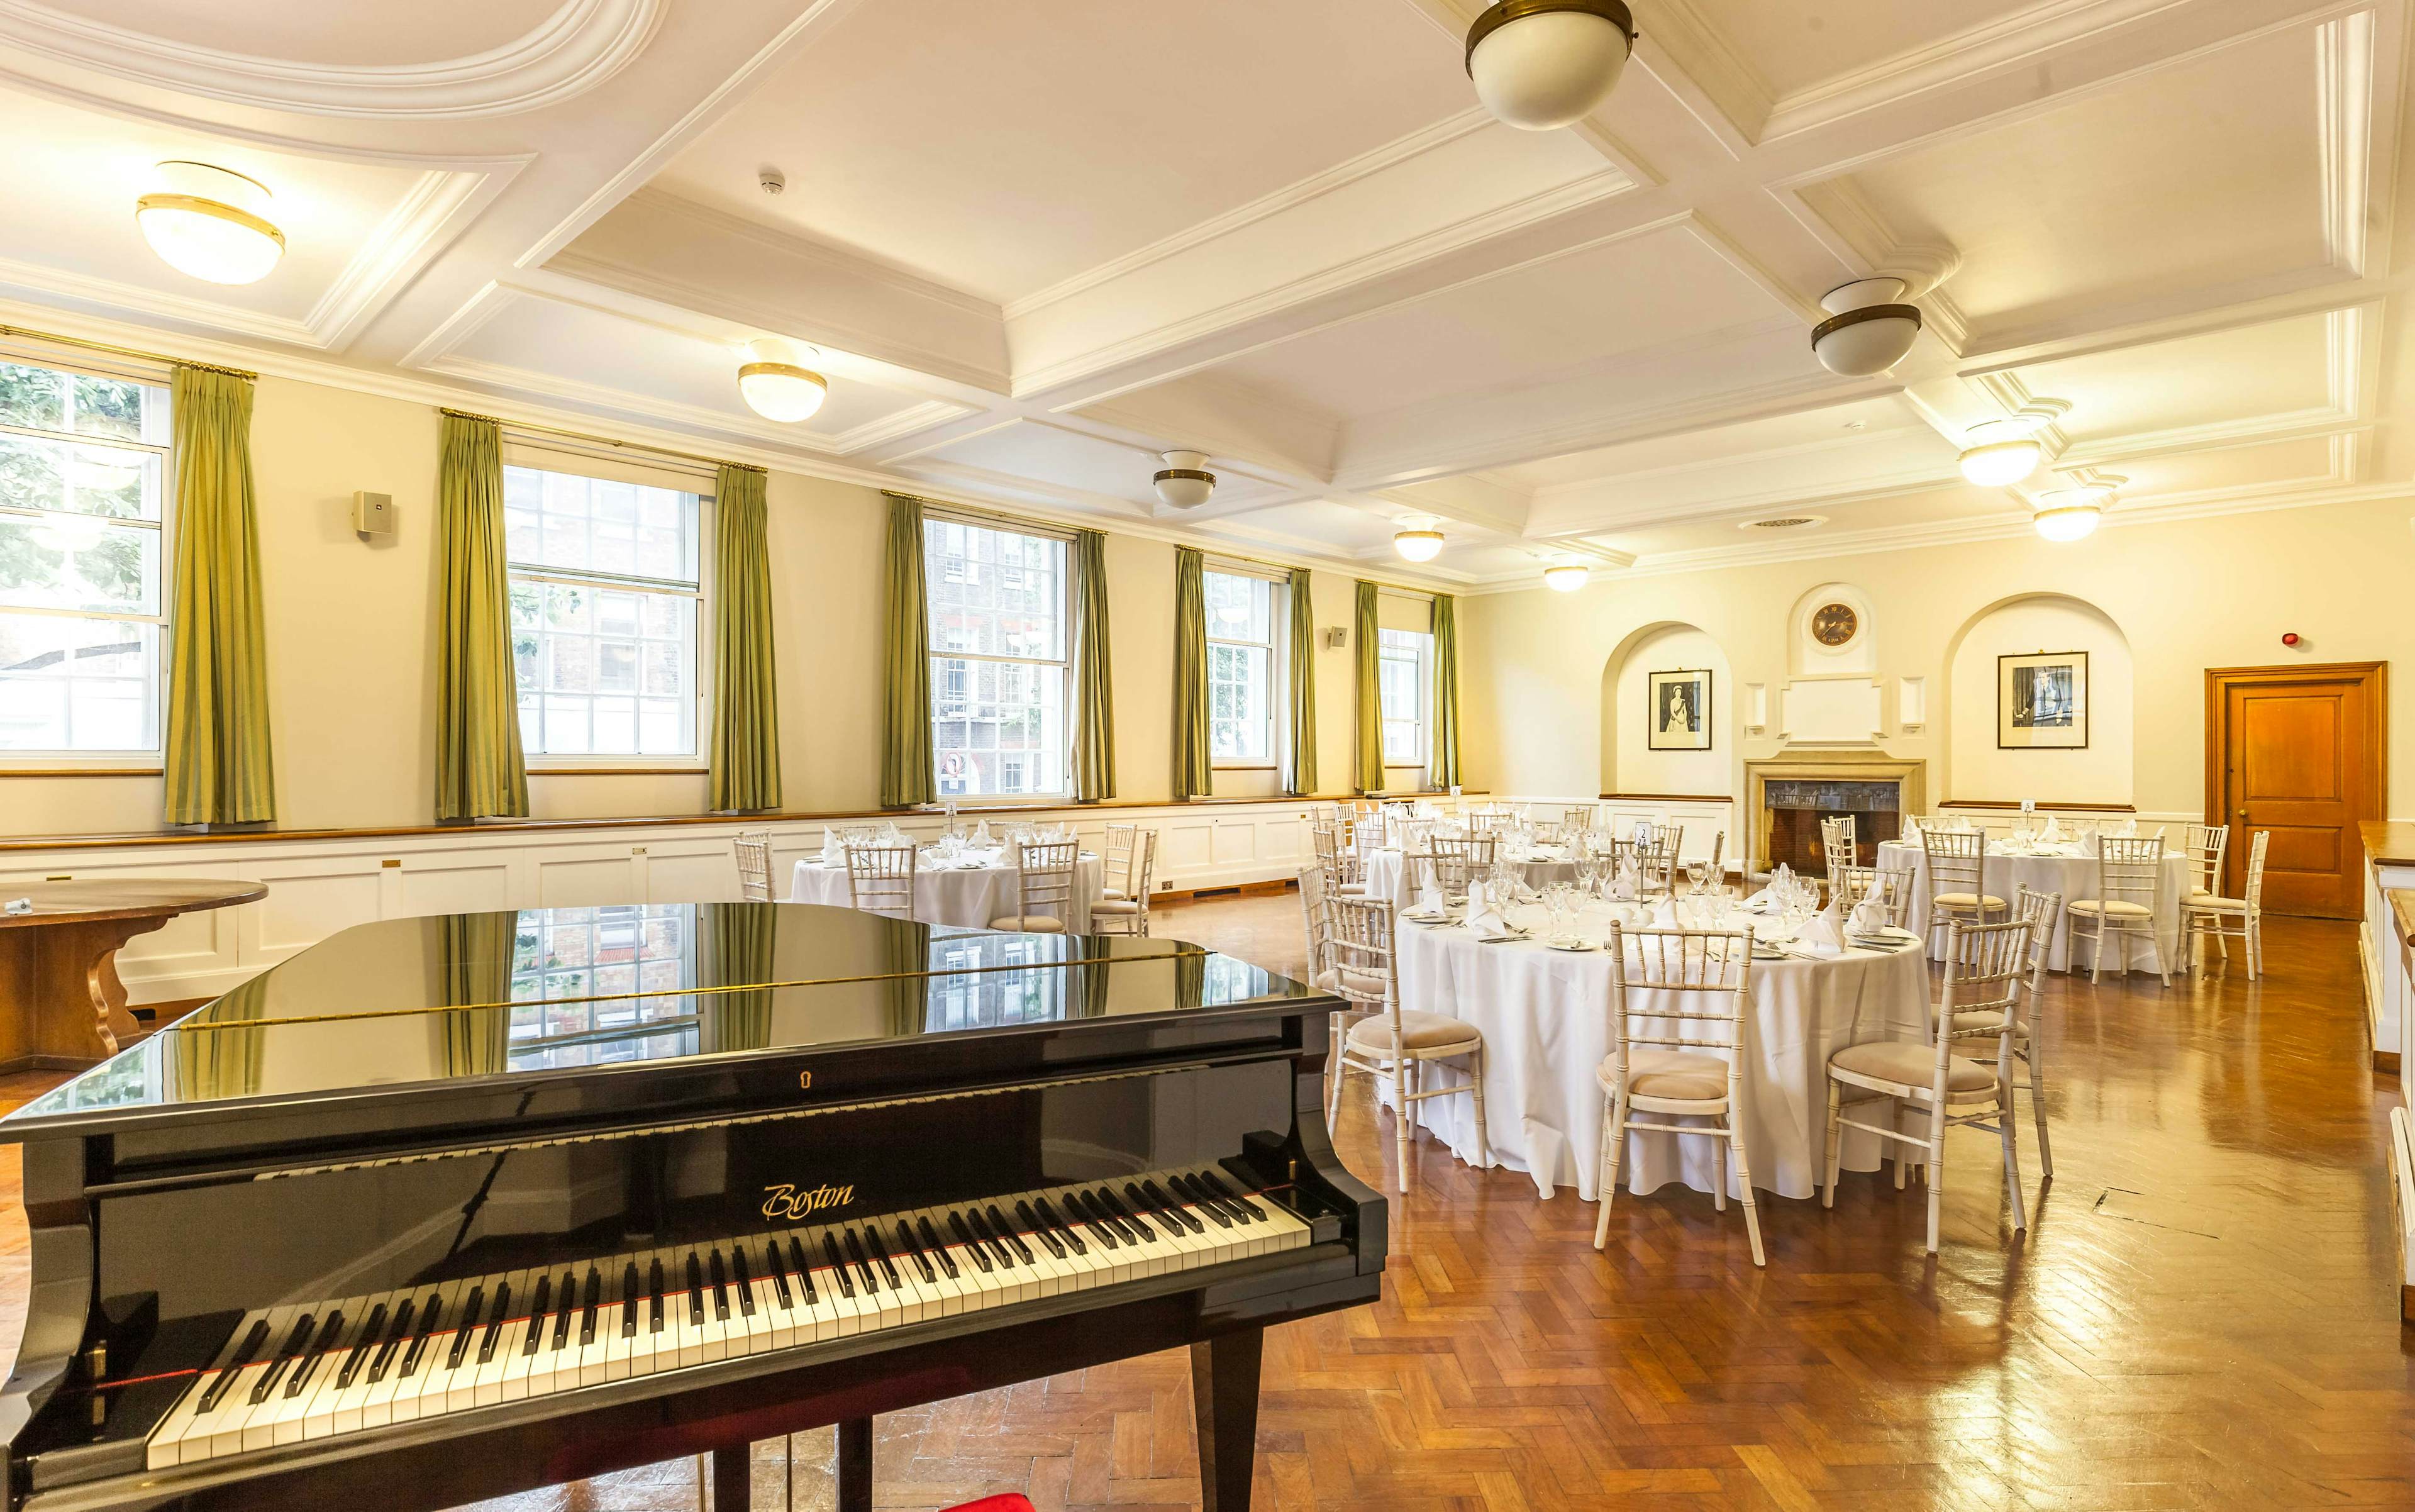 Goodenough College Events & Venue Hire - London House Large Common Room  image 1